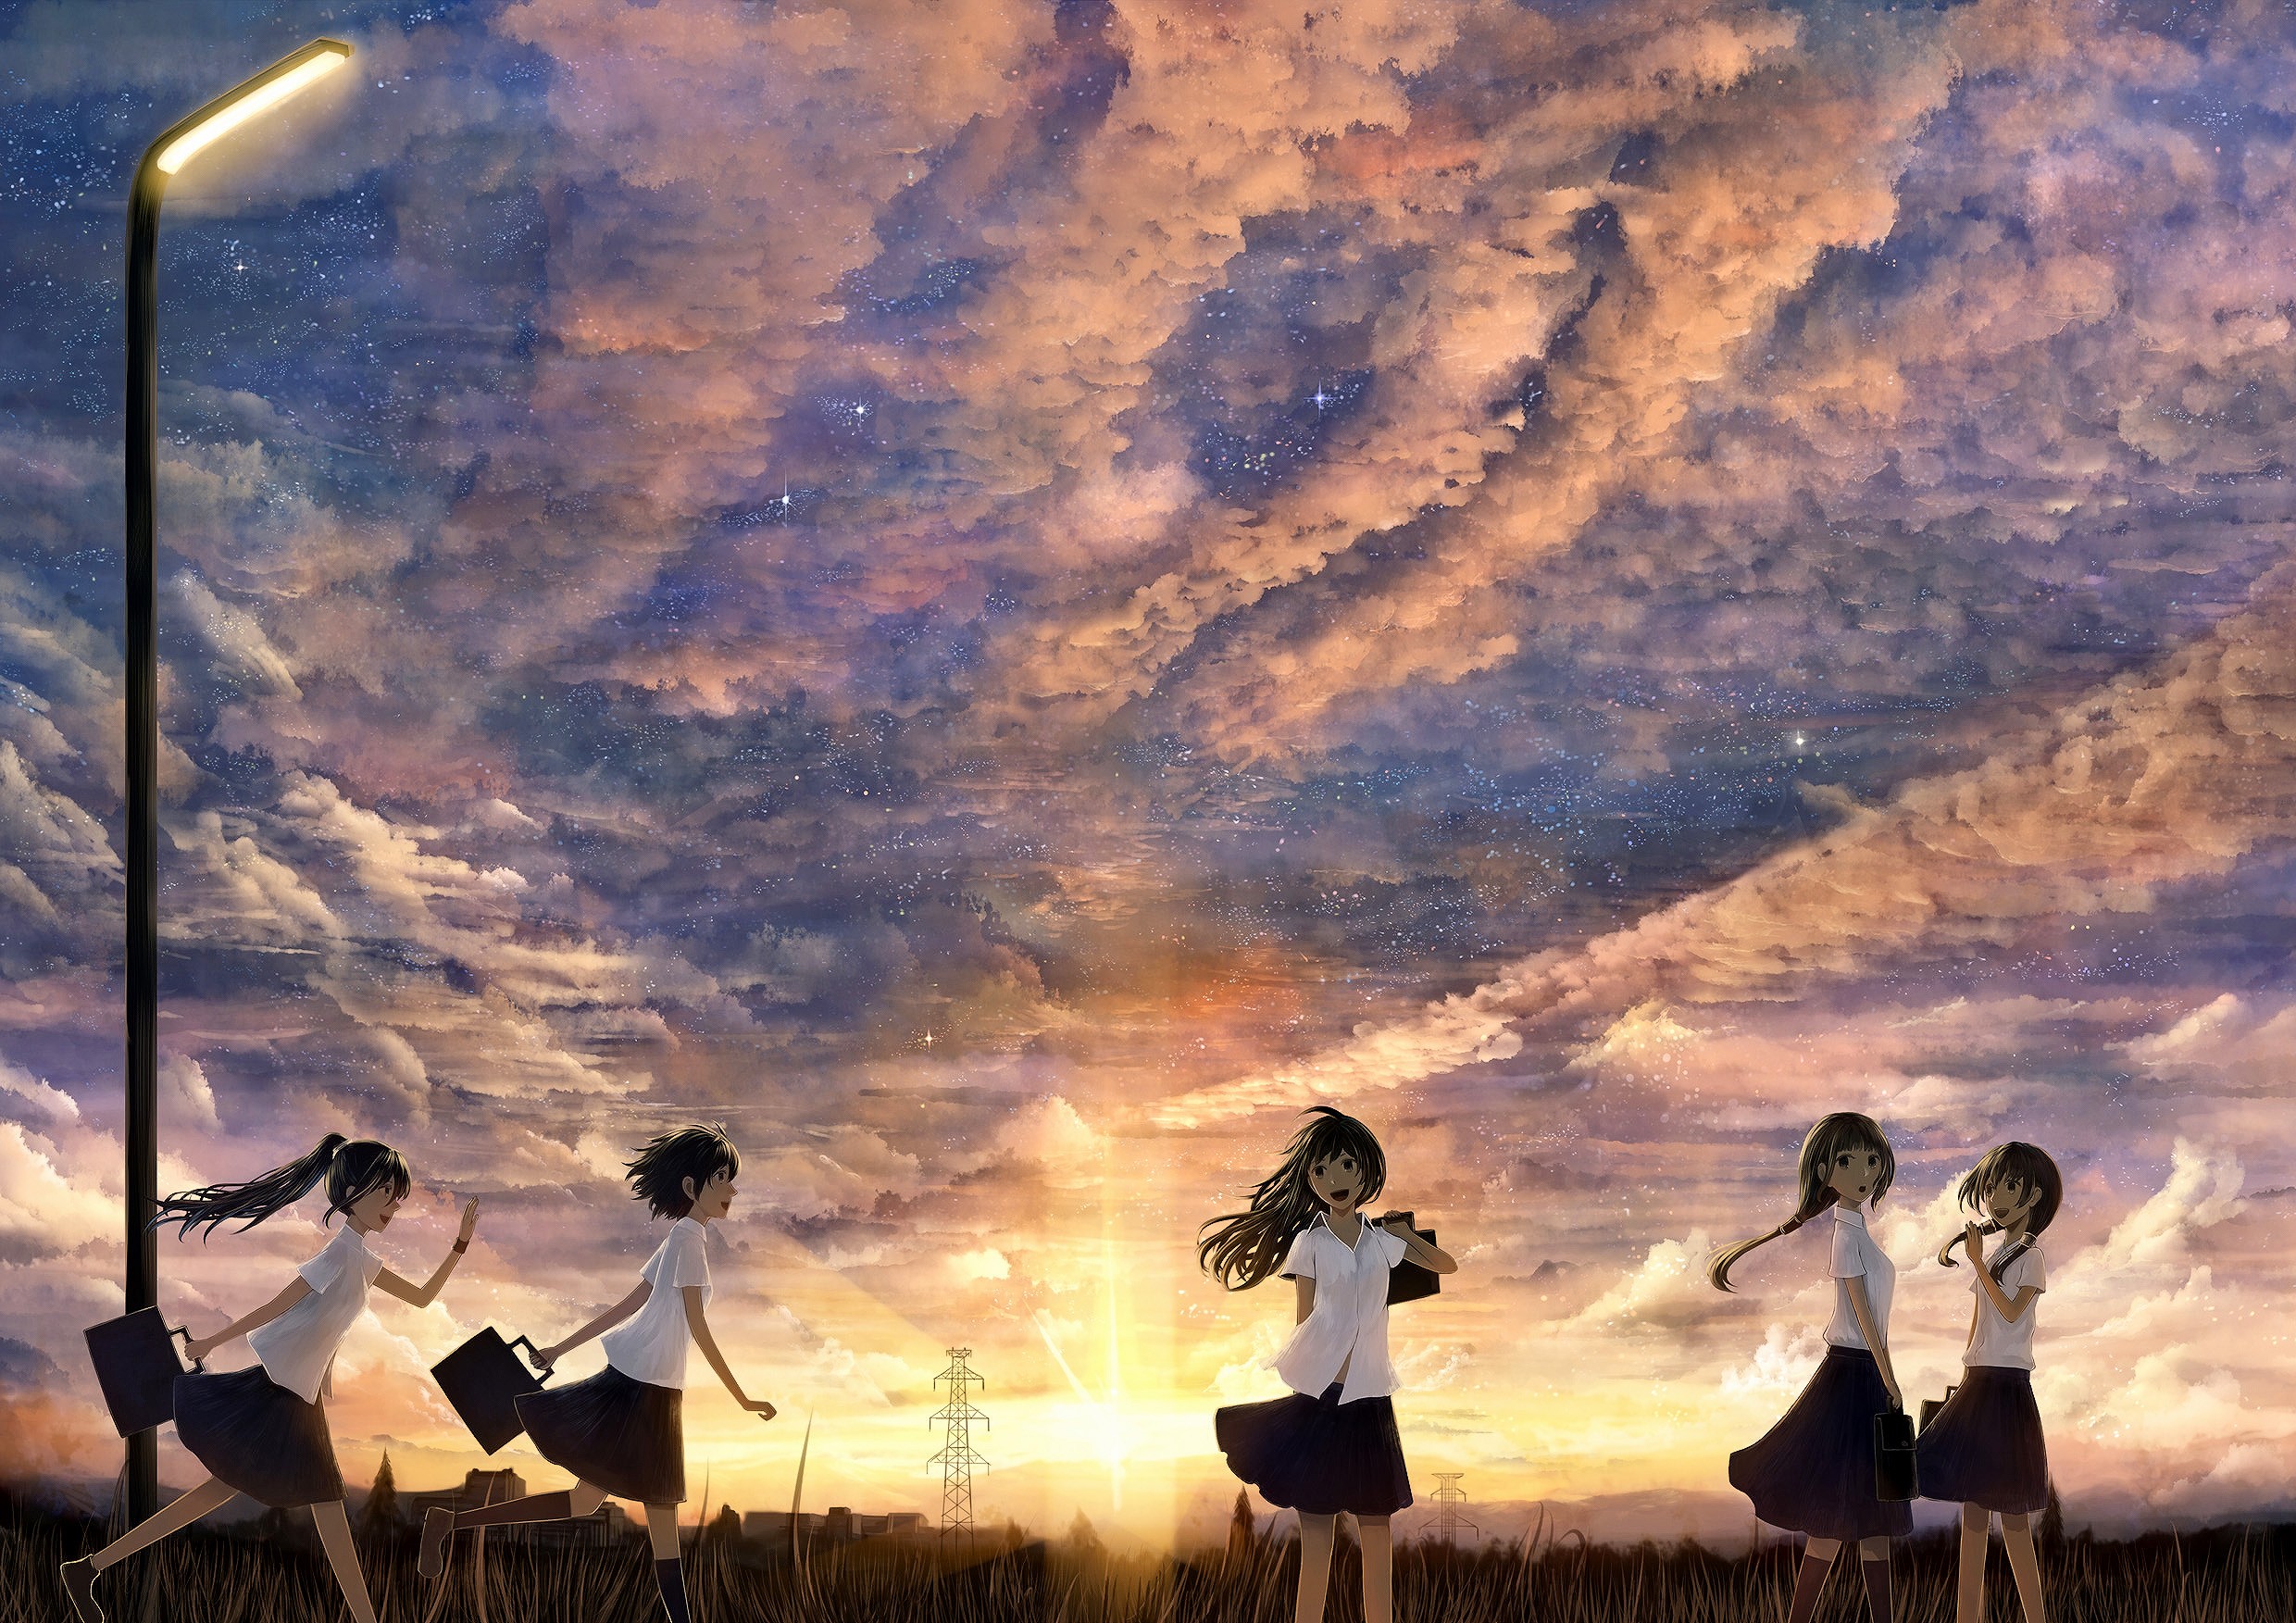 sunset, Clouds, Landscapes, Uniforms, Stars, School, Uniforms, Black, Eyes, Thigh, Highs, Scenic, Anime, Bags, Anime, Girls, Cloud, Black, Hair, Lampard Wallpaper